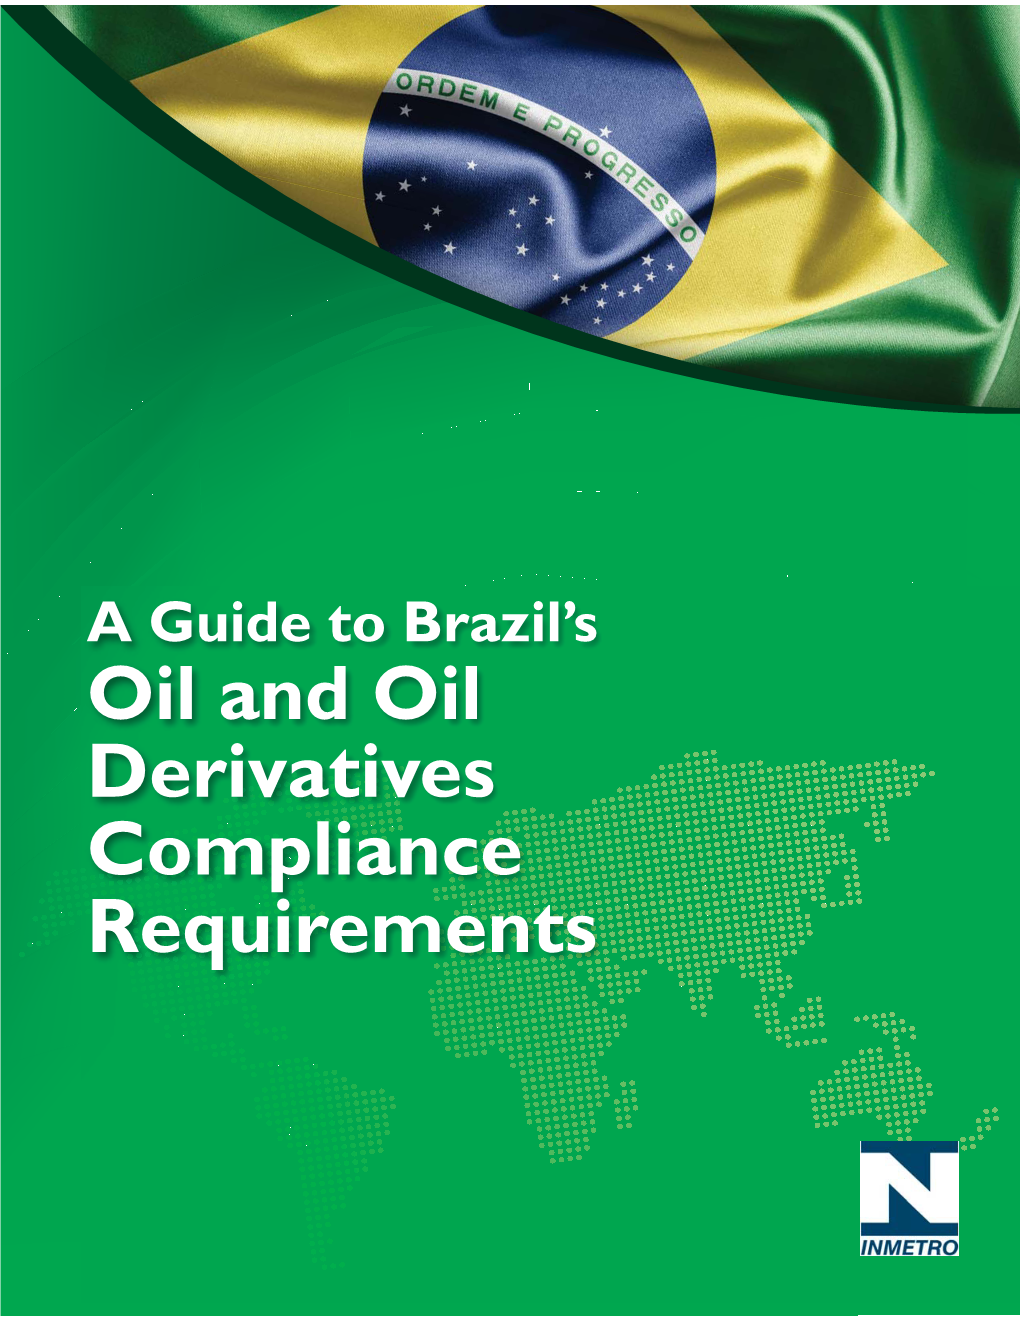 A Guide to Brazil's Oil and Oil Derivatives Compliance Requirements